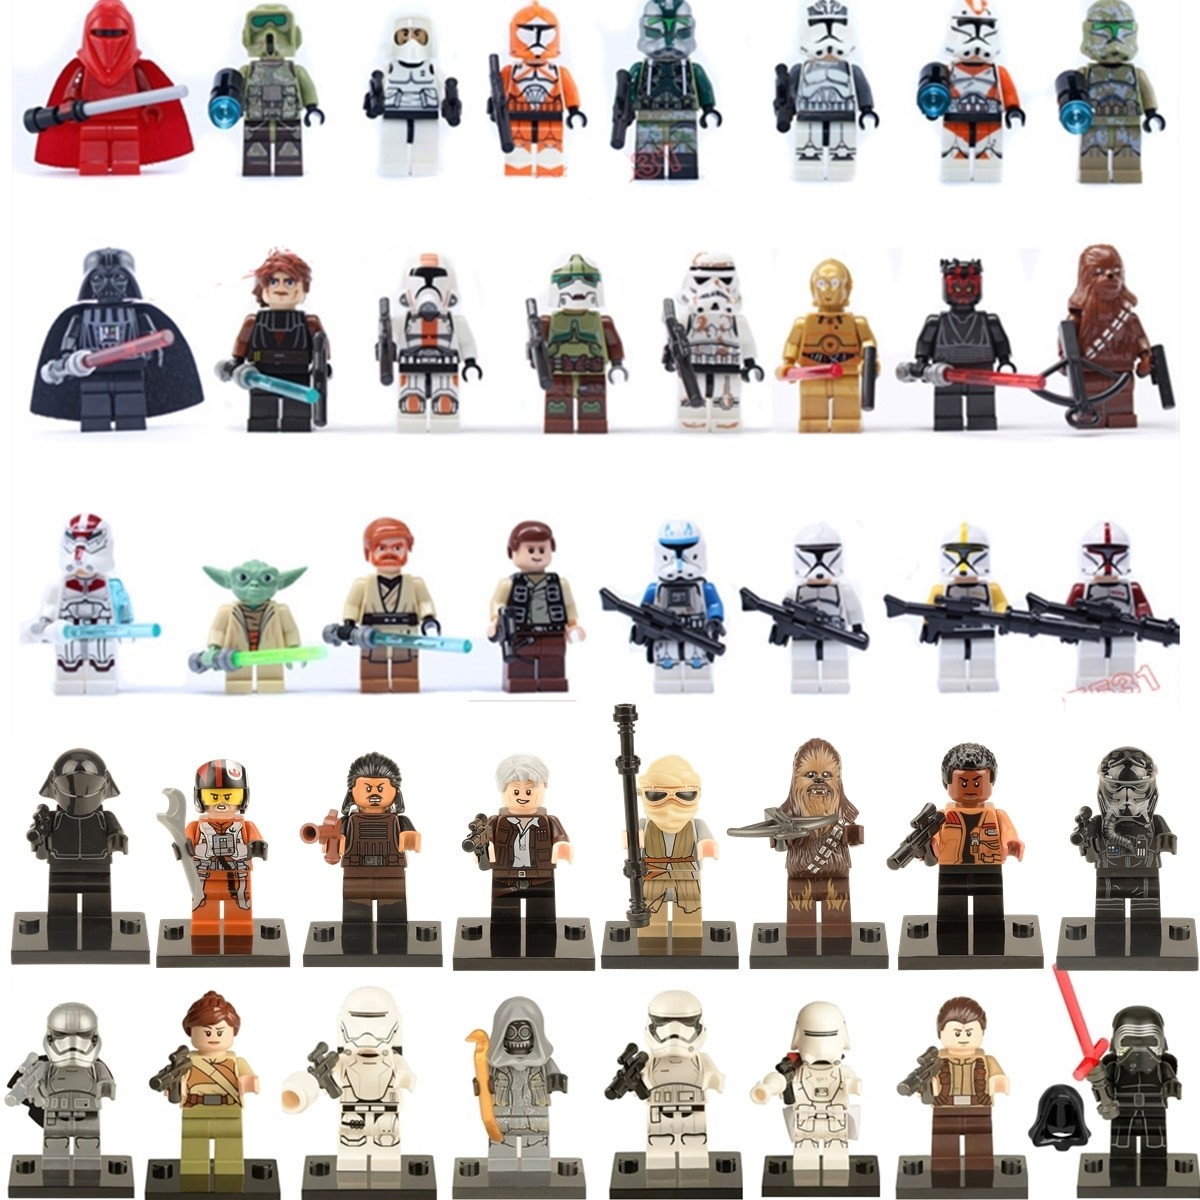 The Most Awesome LEGO Star Wars Minifigures